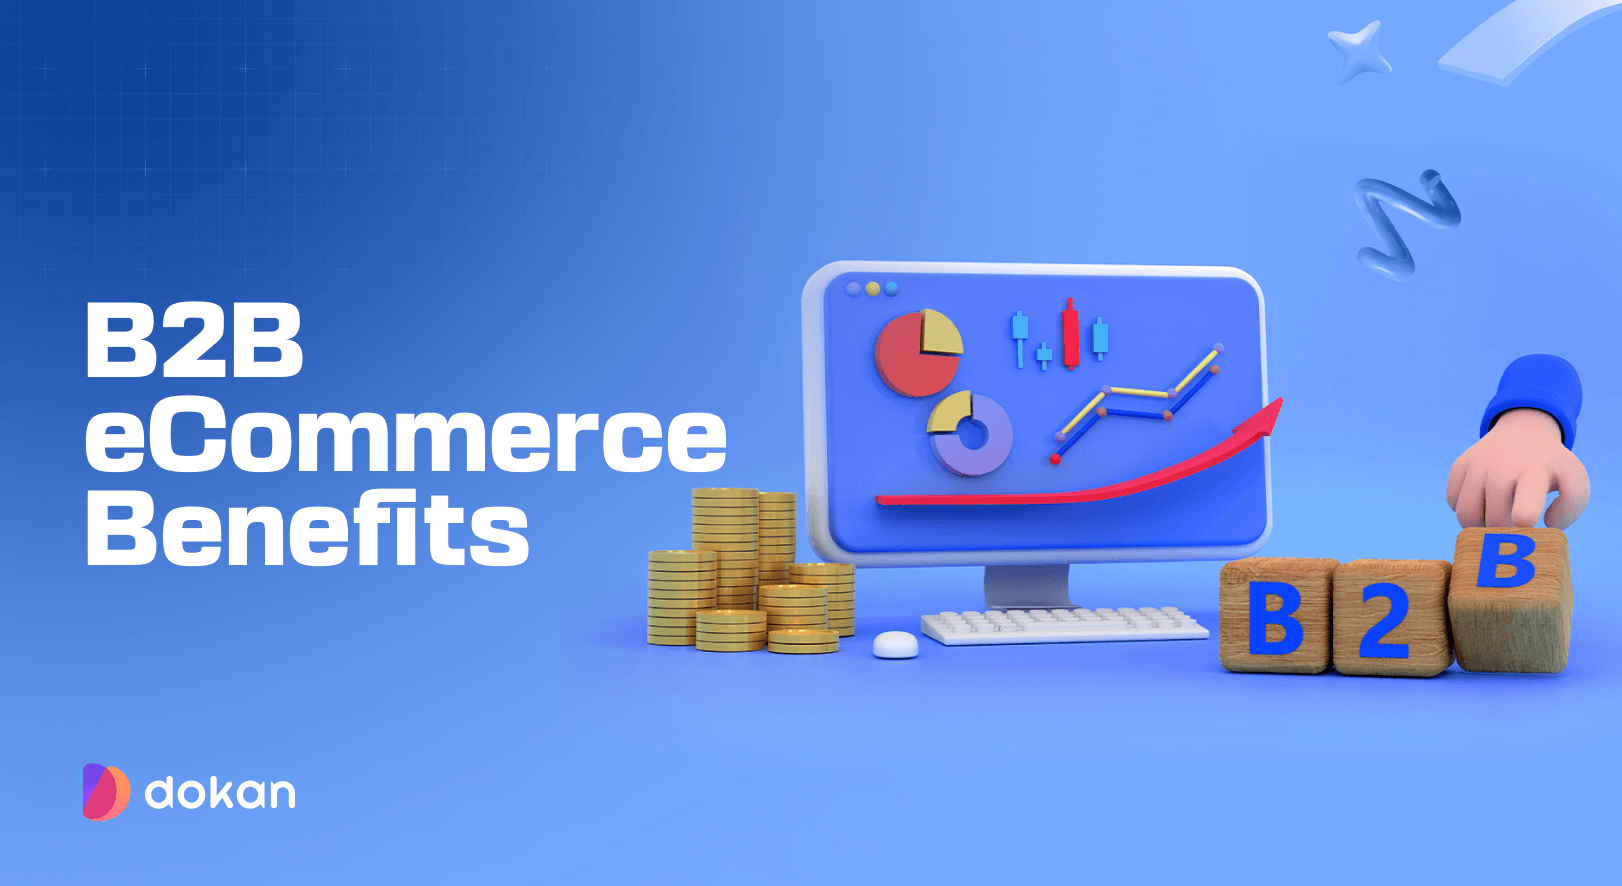 This is the feature image of the blog - B2B eCommerce Benefits